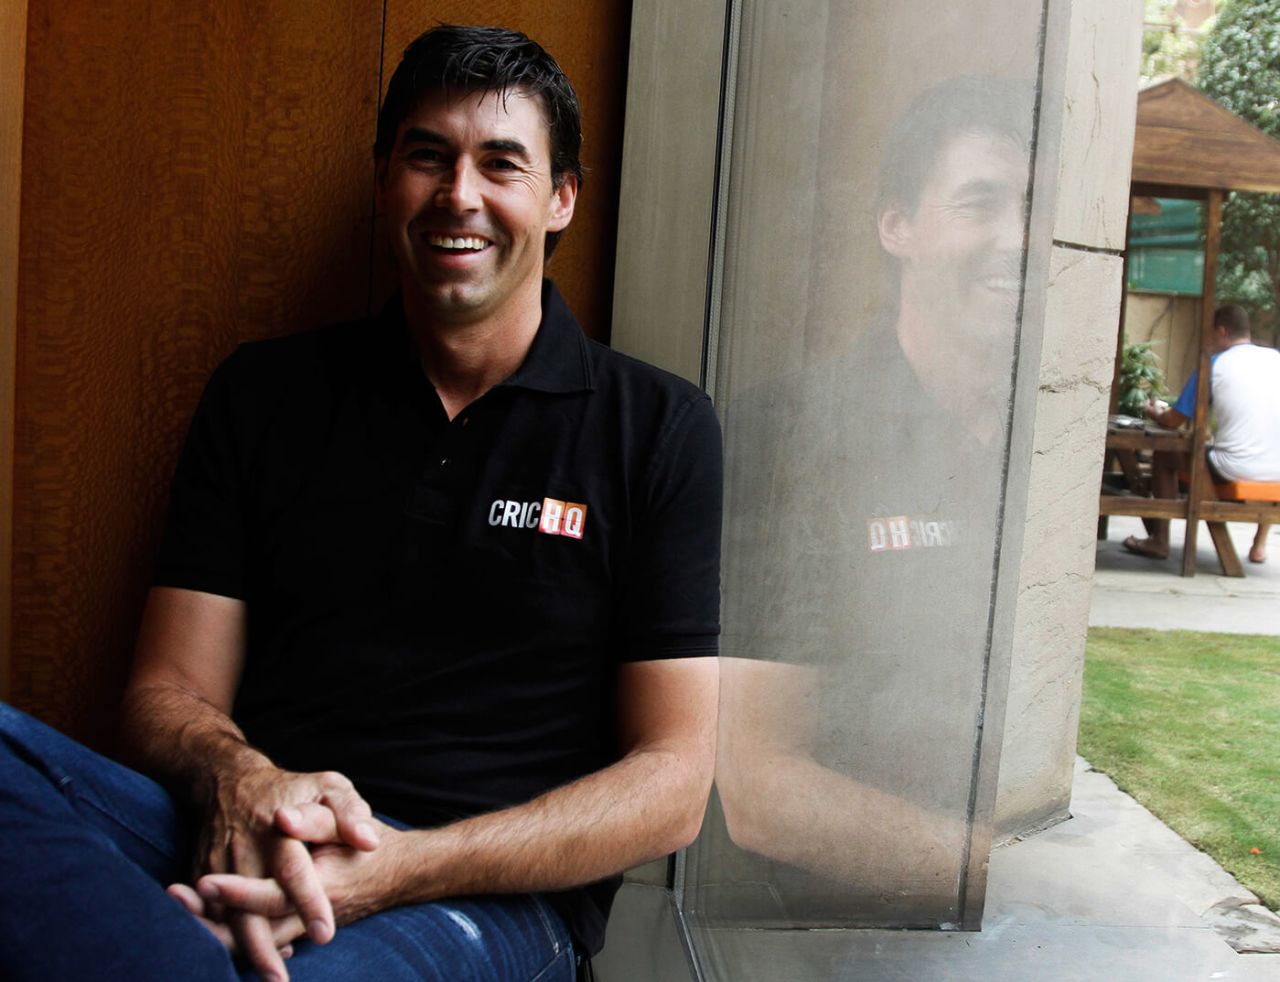 Stephen Fleming smiles during a photo shoot at the ITC Maurya Sheraton hotel in New Delhi, May 6, 2014